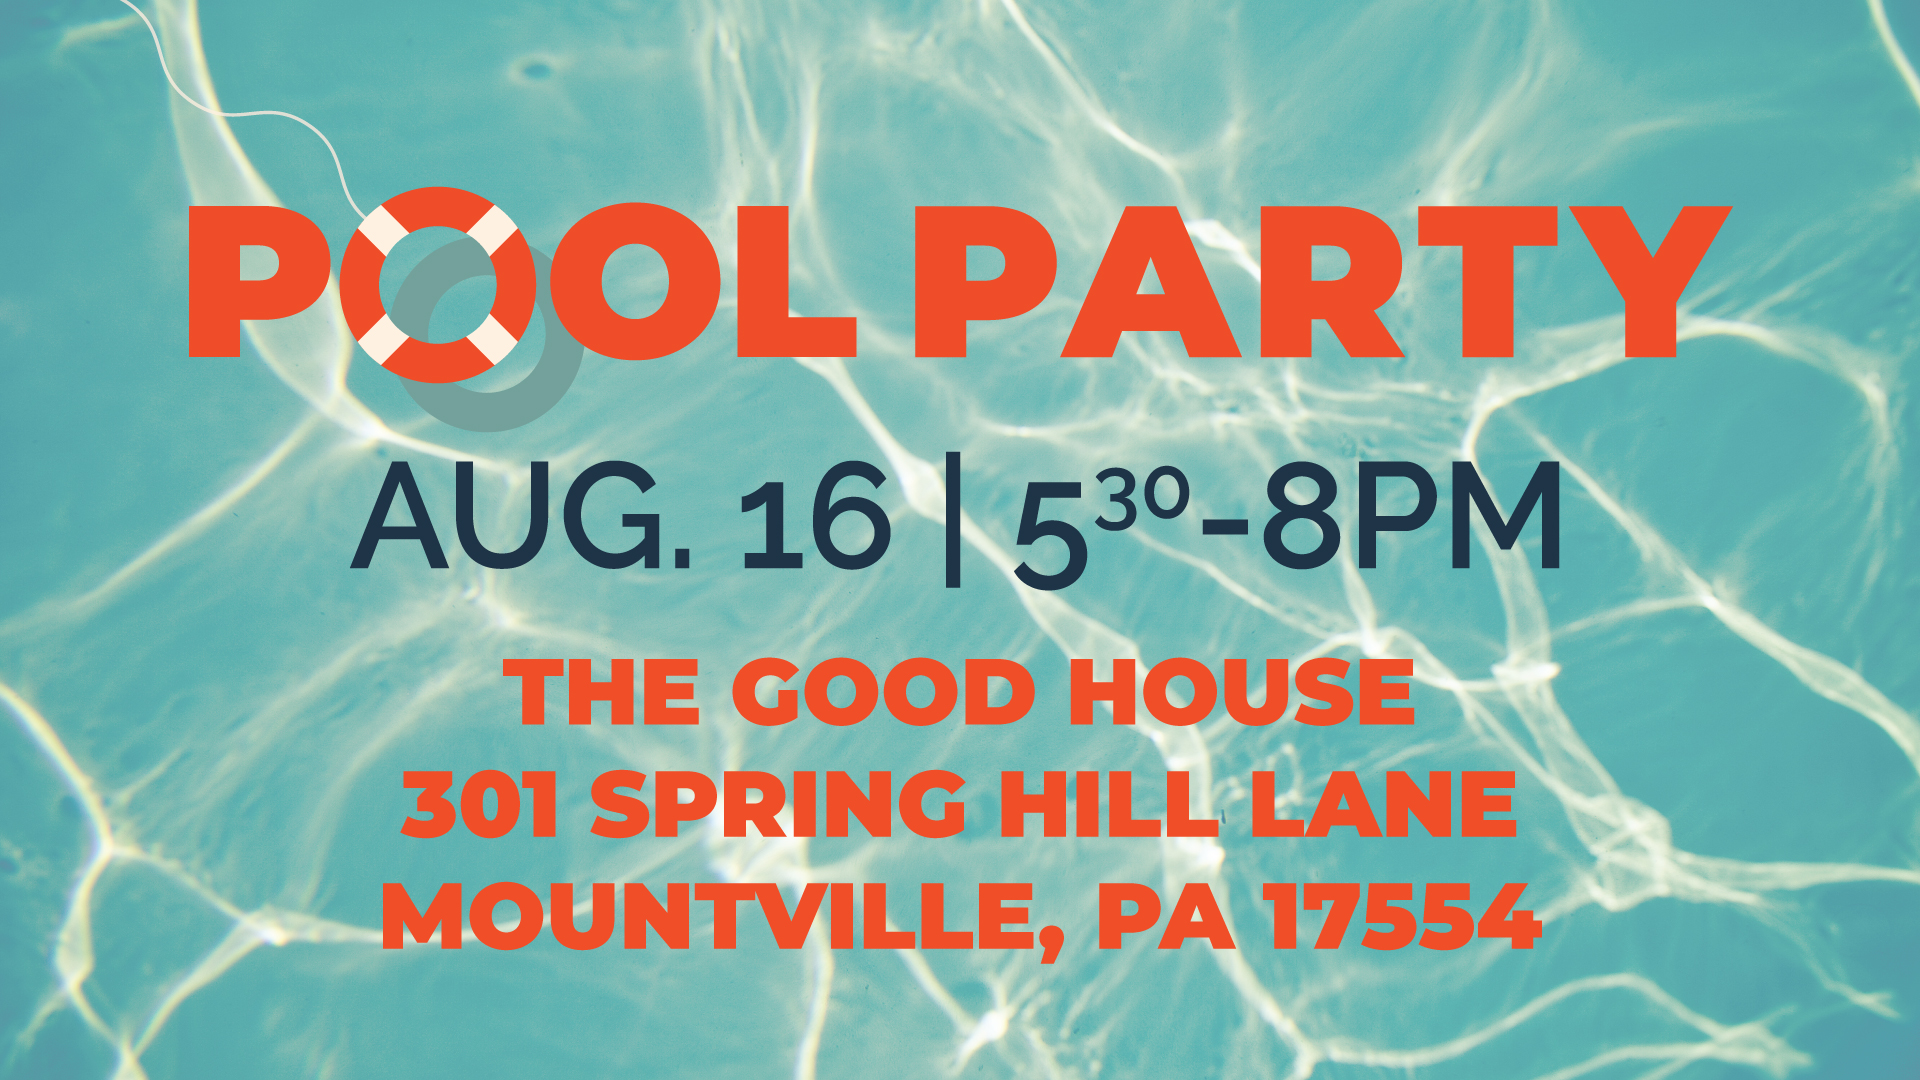 Pool Party | August 16 from 5:30-8PM. The Good House: 301 Spring Hill Lane, Mountville, PA 17554